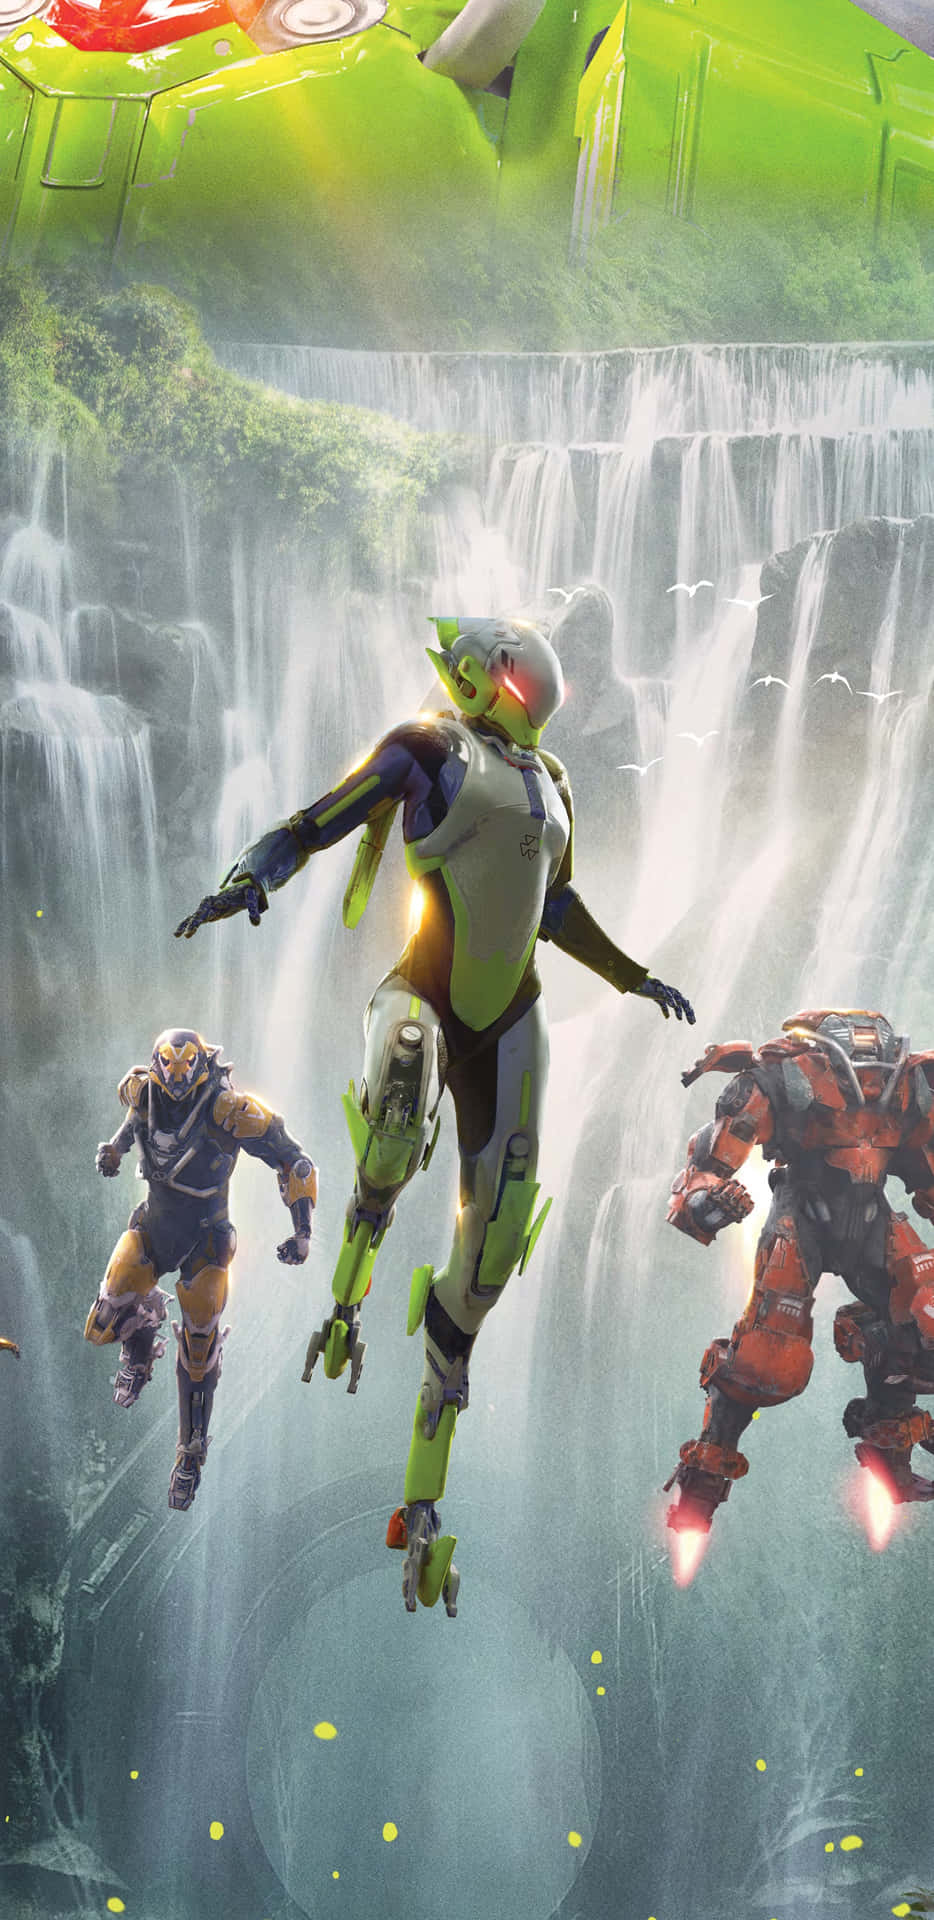 Explore the world of Anthem in stunning detail Wallpaper